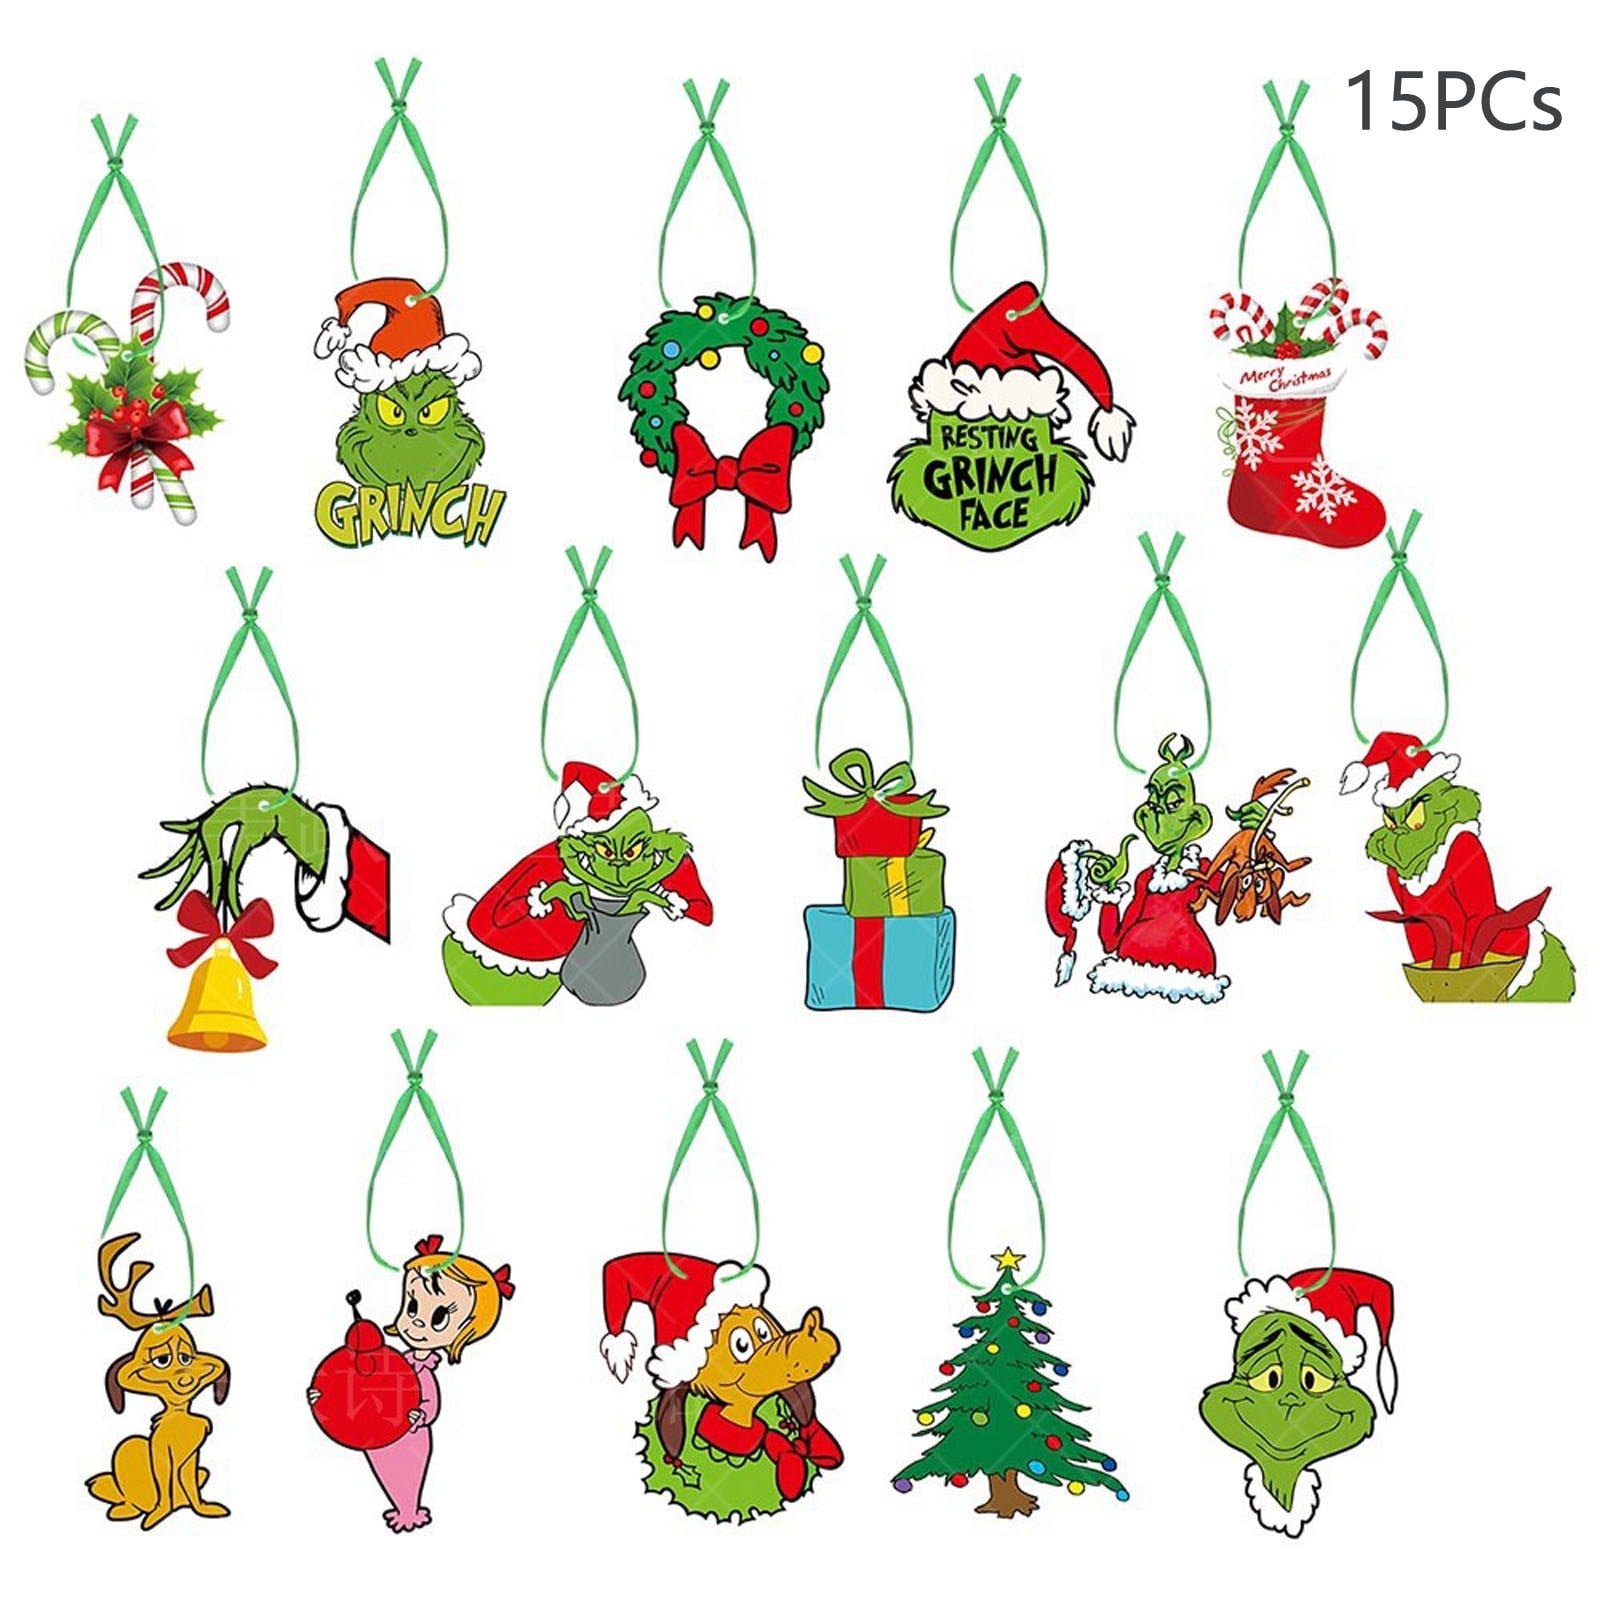 Don't Miss Out! Gomind 15PCS Christmas Gr1nch Ornaments,Gr1nch Stole ...